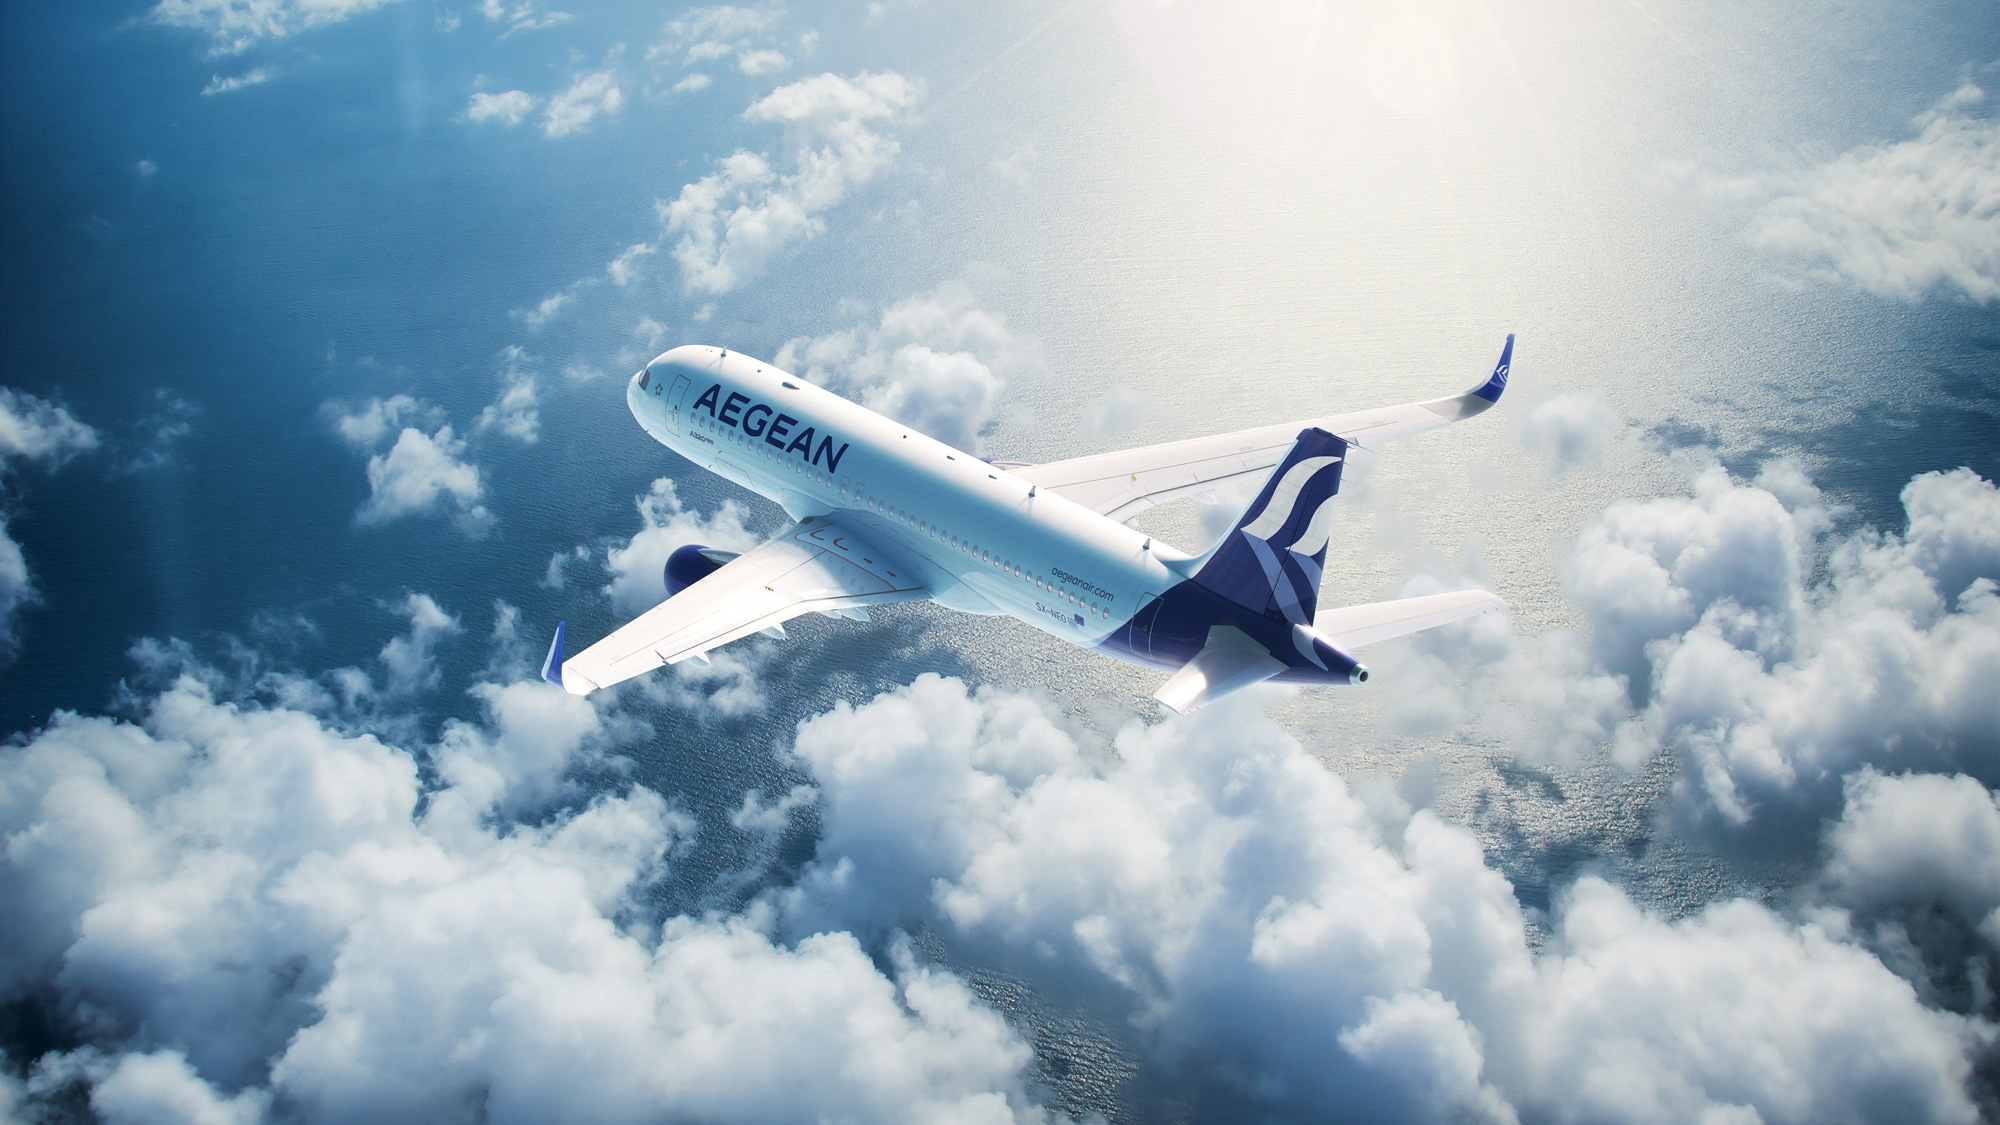 Reviewed New Logo Identity And Livery For Aegean By Priestmangoode